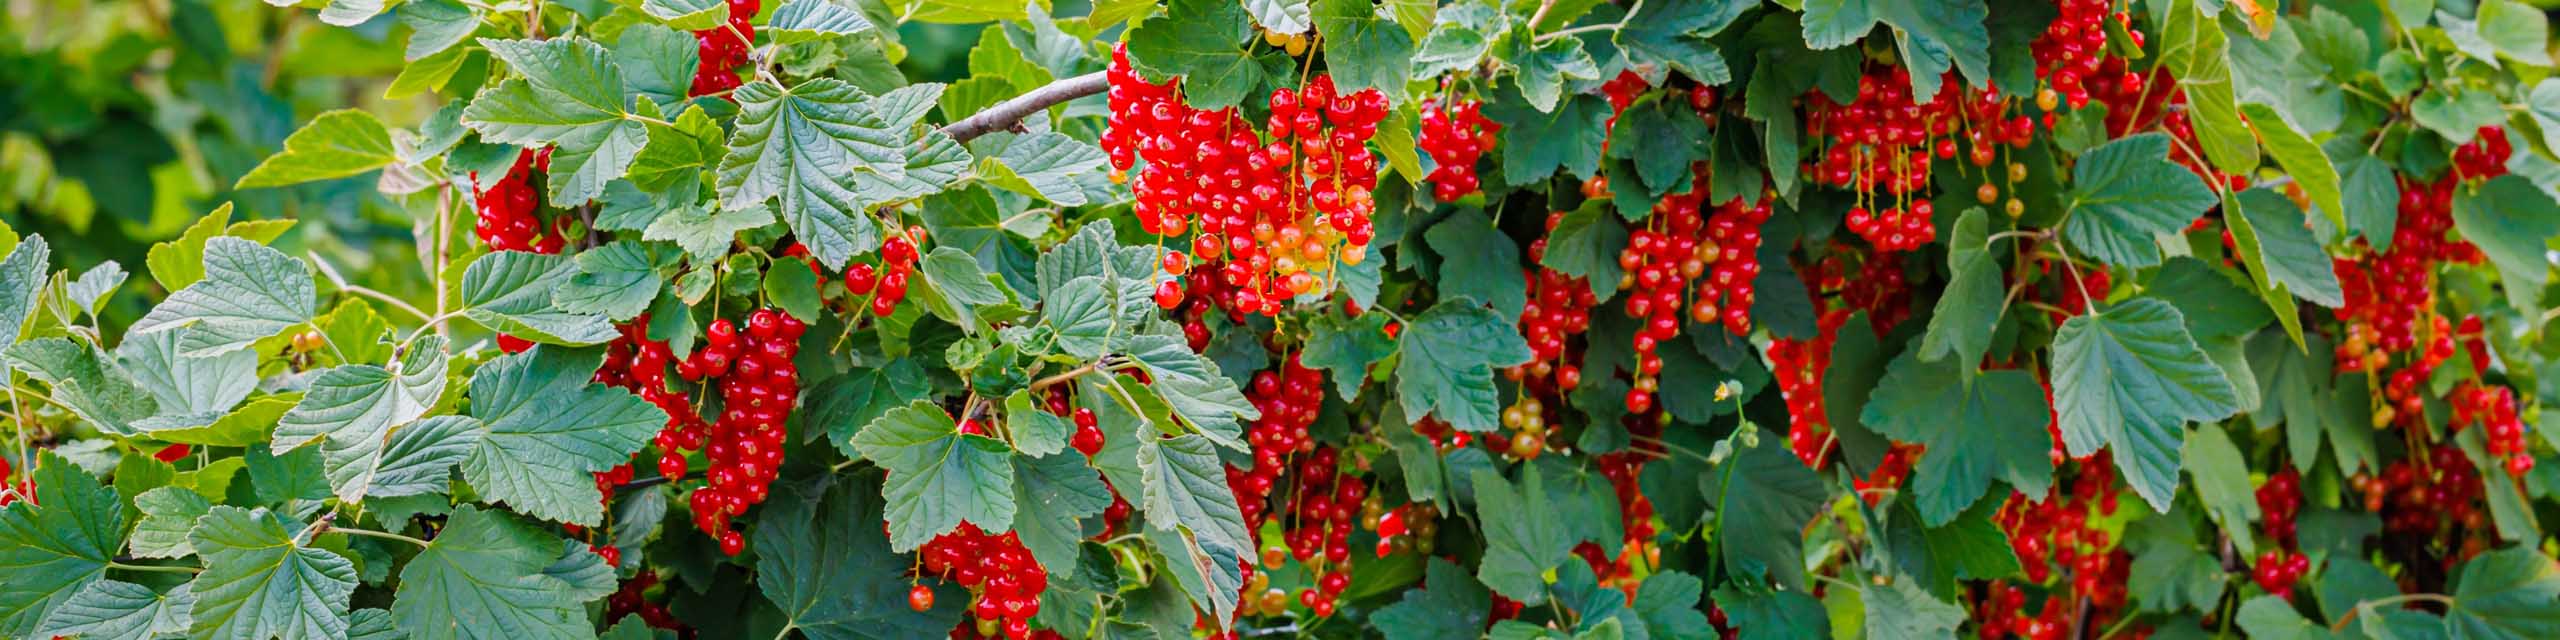 Red currants on a bush.